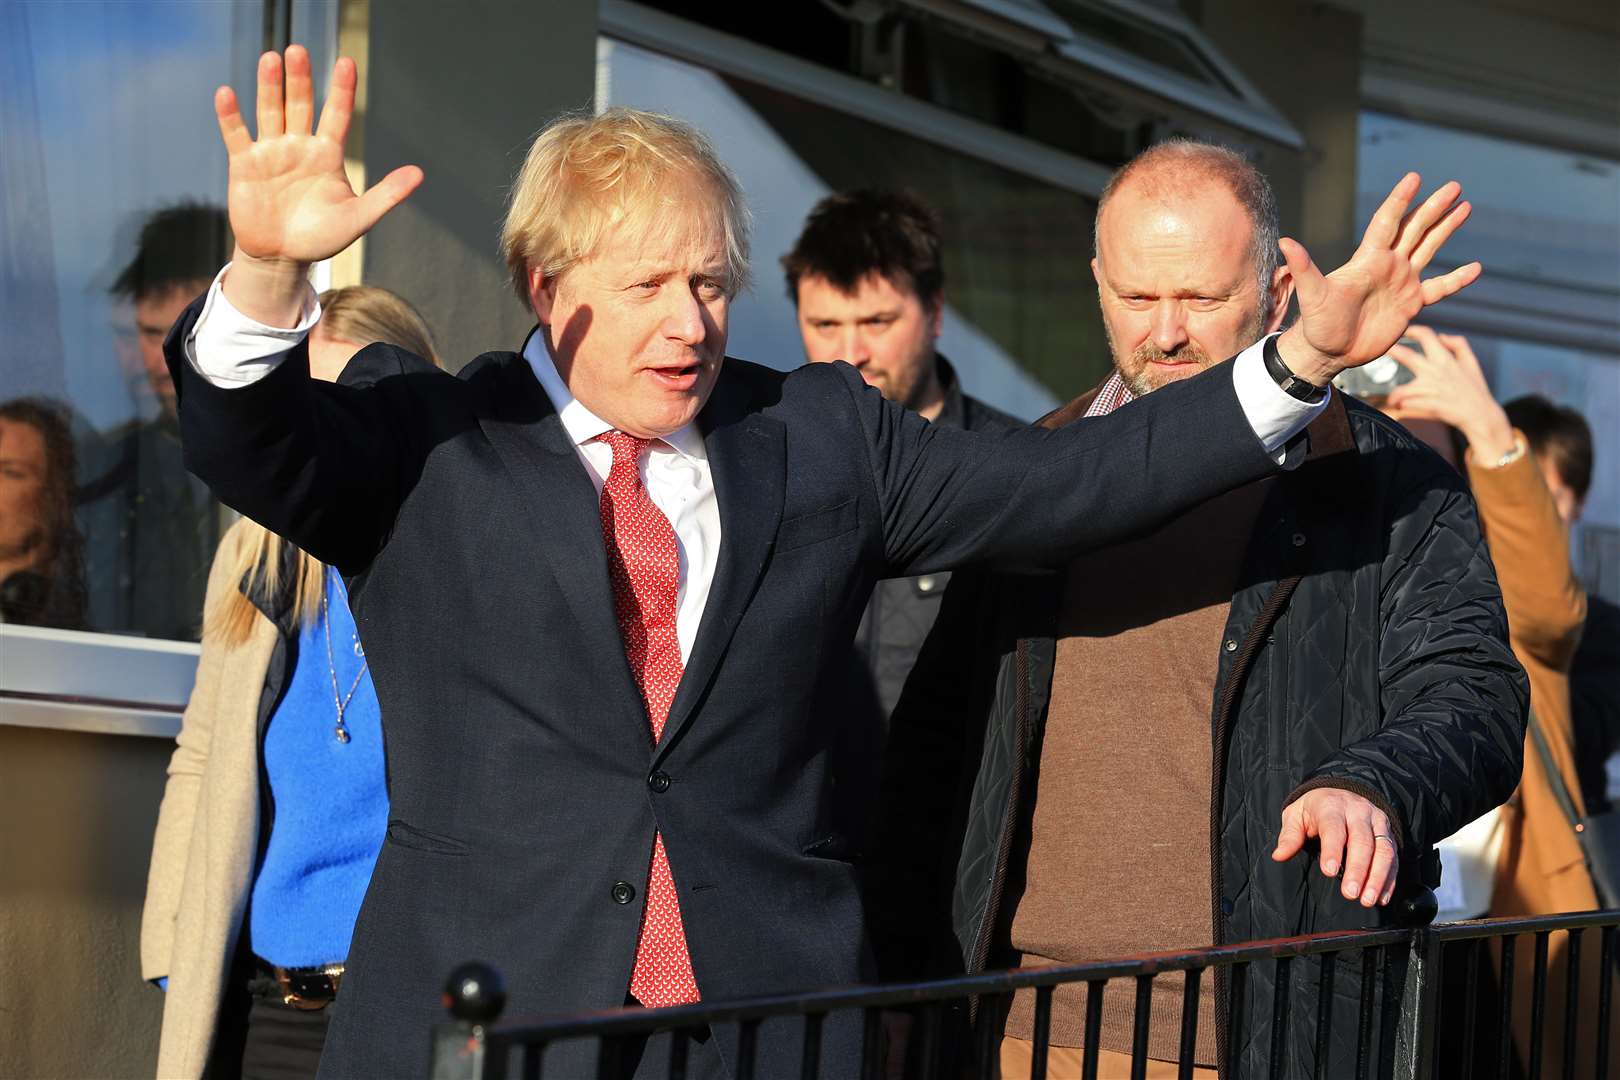 Prime Minister Boris Johnson visited Sedgefield after his election victory in 2019 – one of a number of his gains in the North East (Lindsey Parnaby/PA)